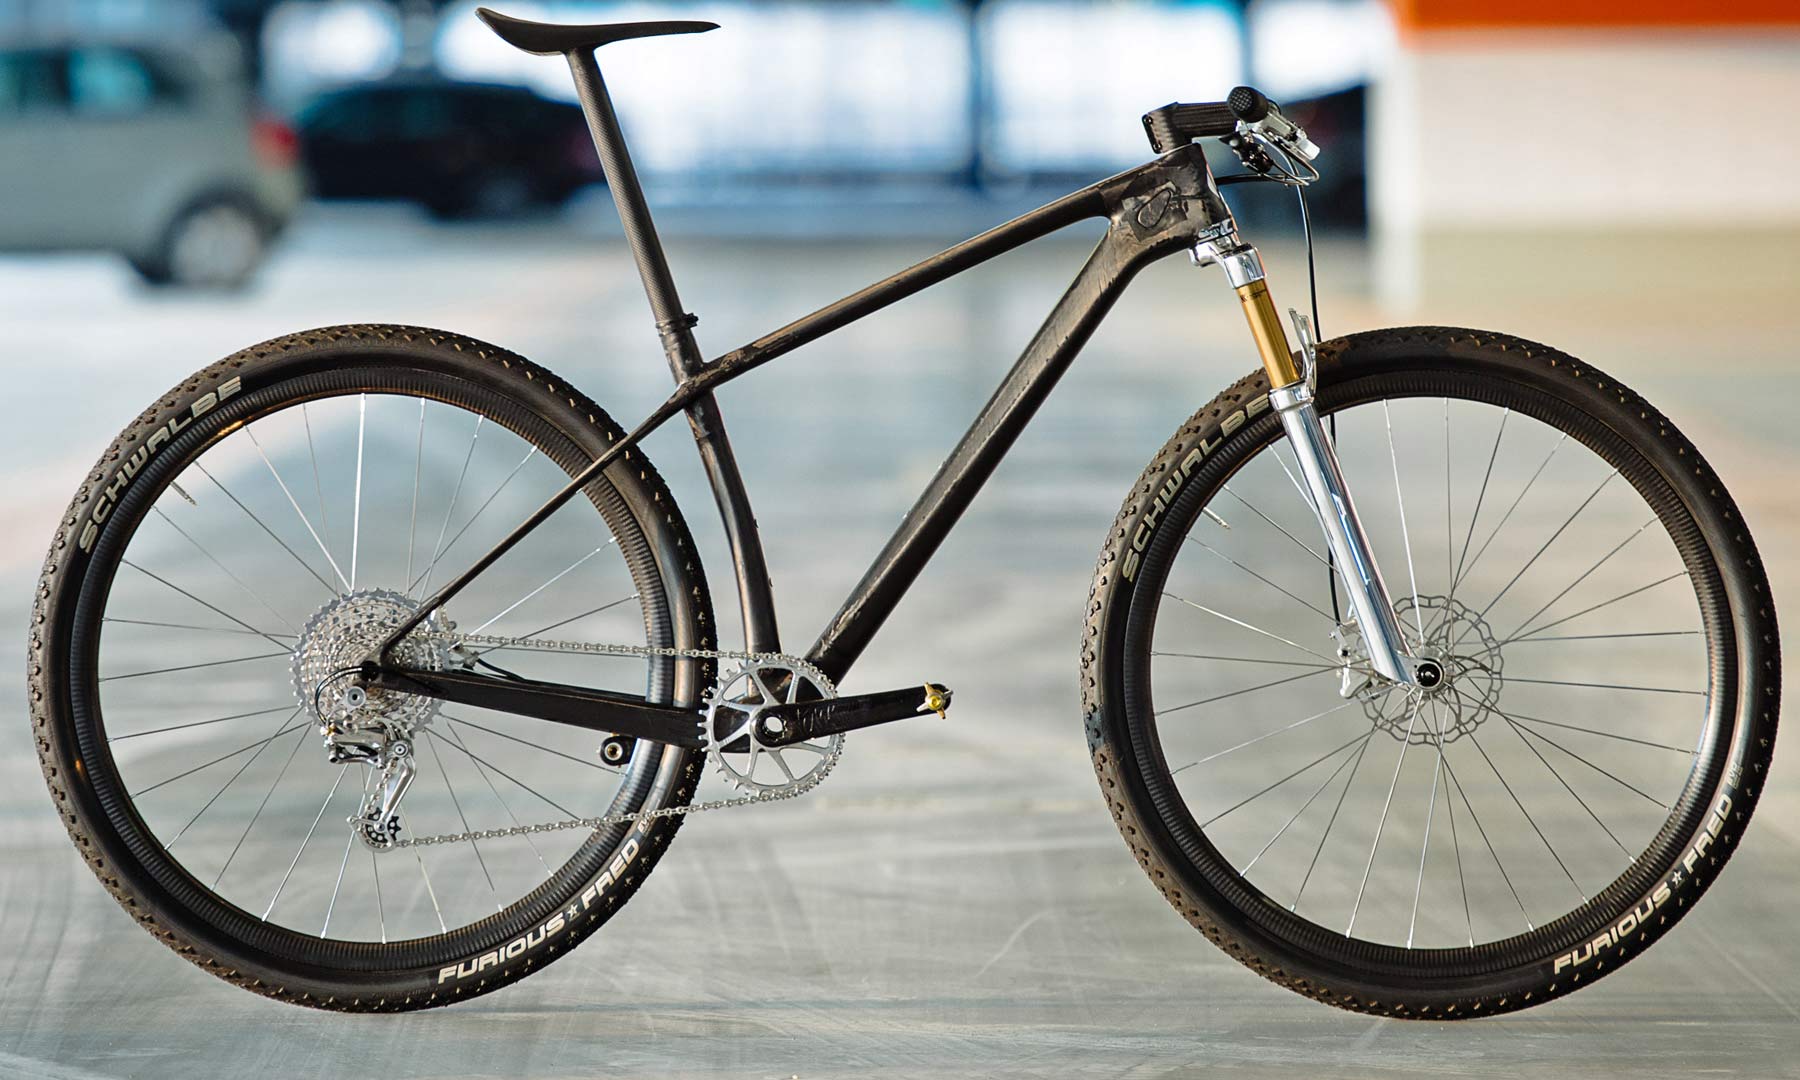 Scott Scale XC hardtail drops significant weight